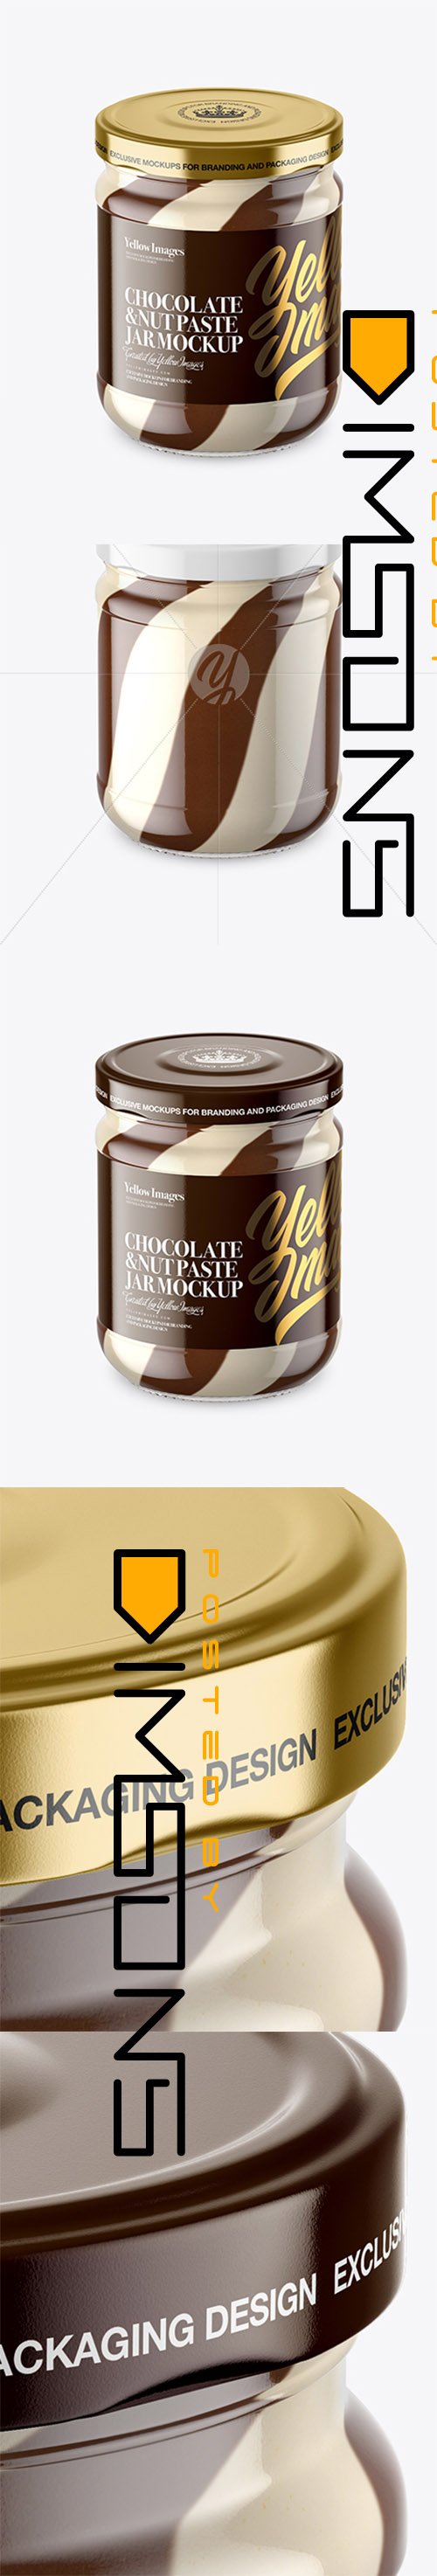 Clear Glass Jar with Duo Chocolate Spread Mockup 33751 TIF